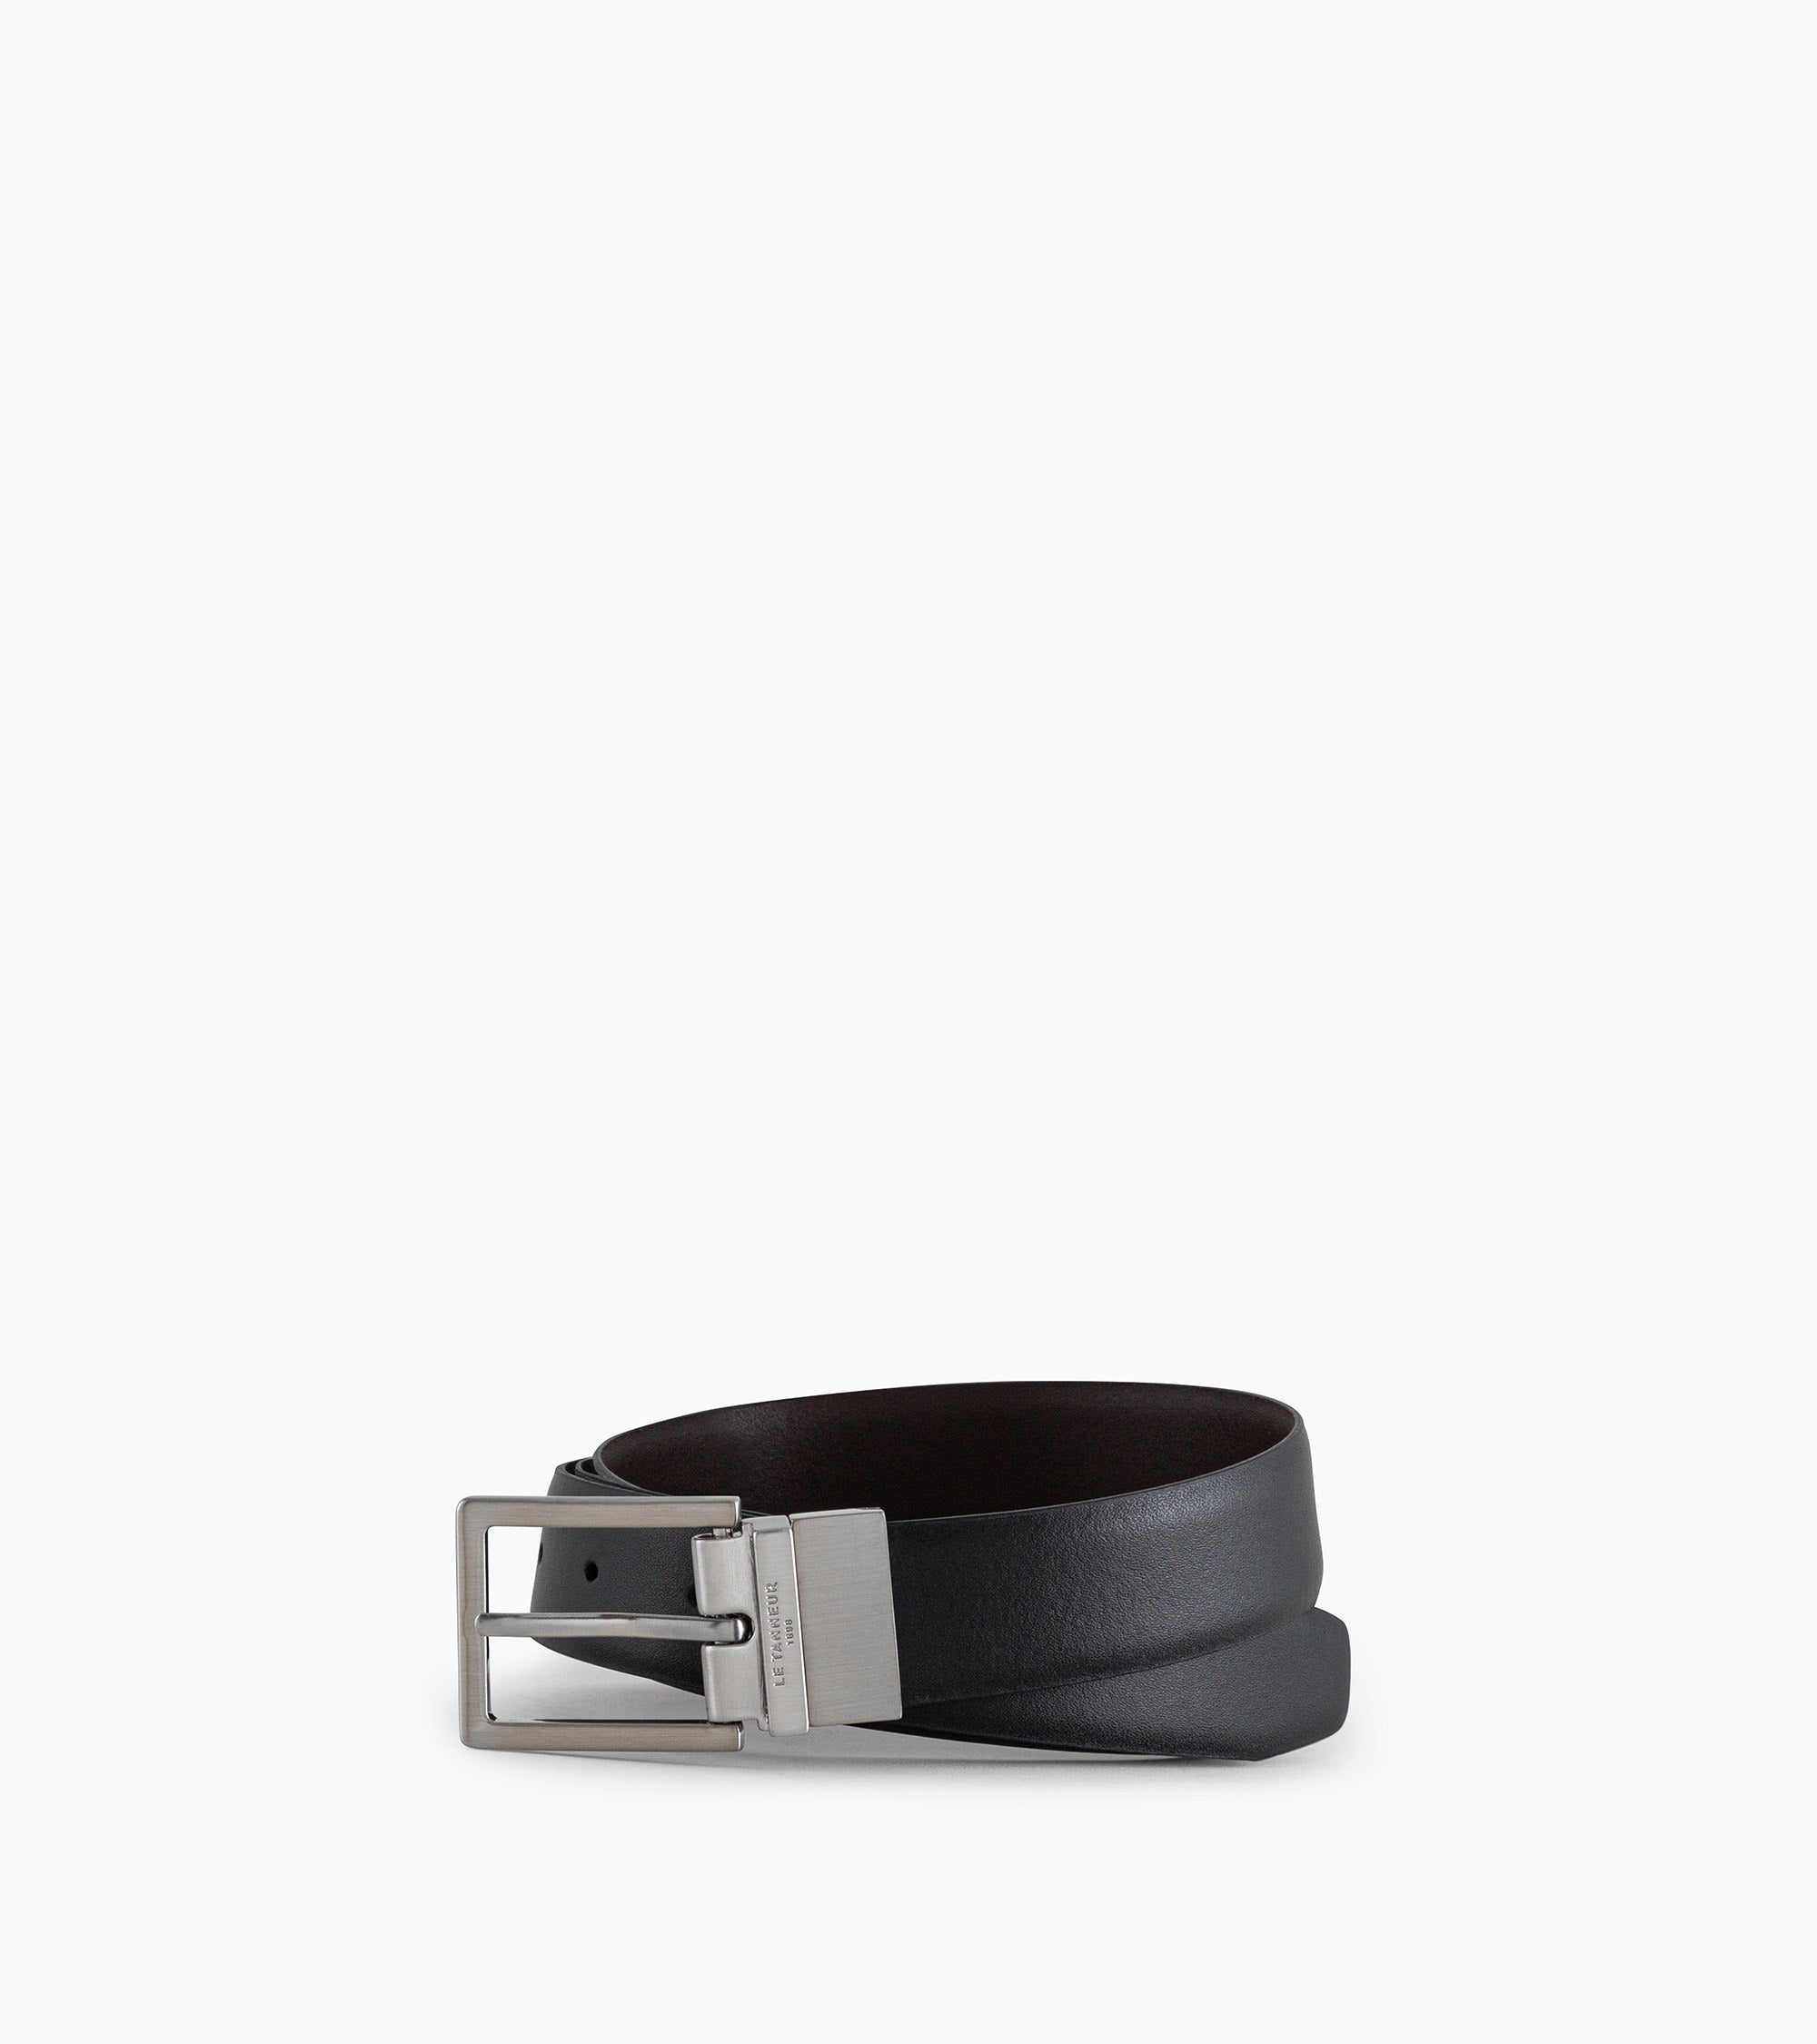 Classic men's belt with square buckle in smooth leather